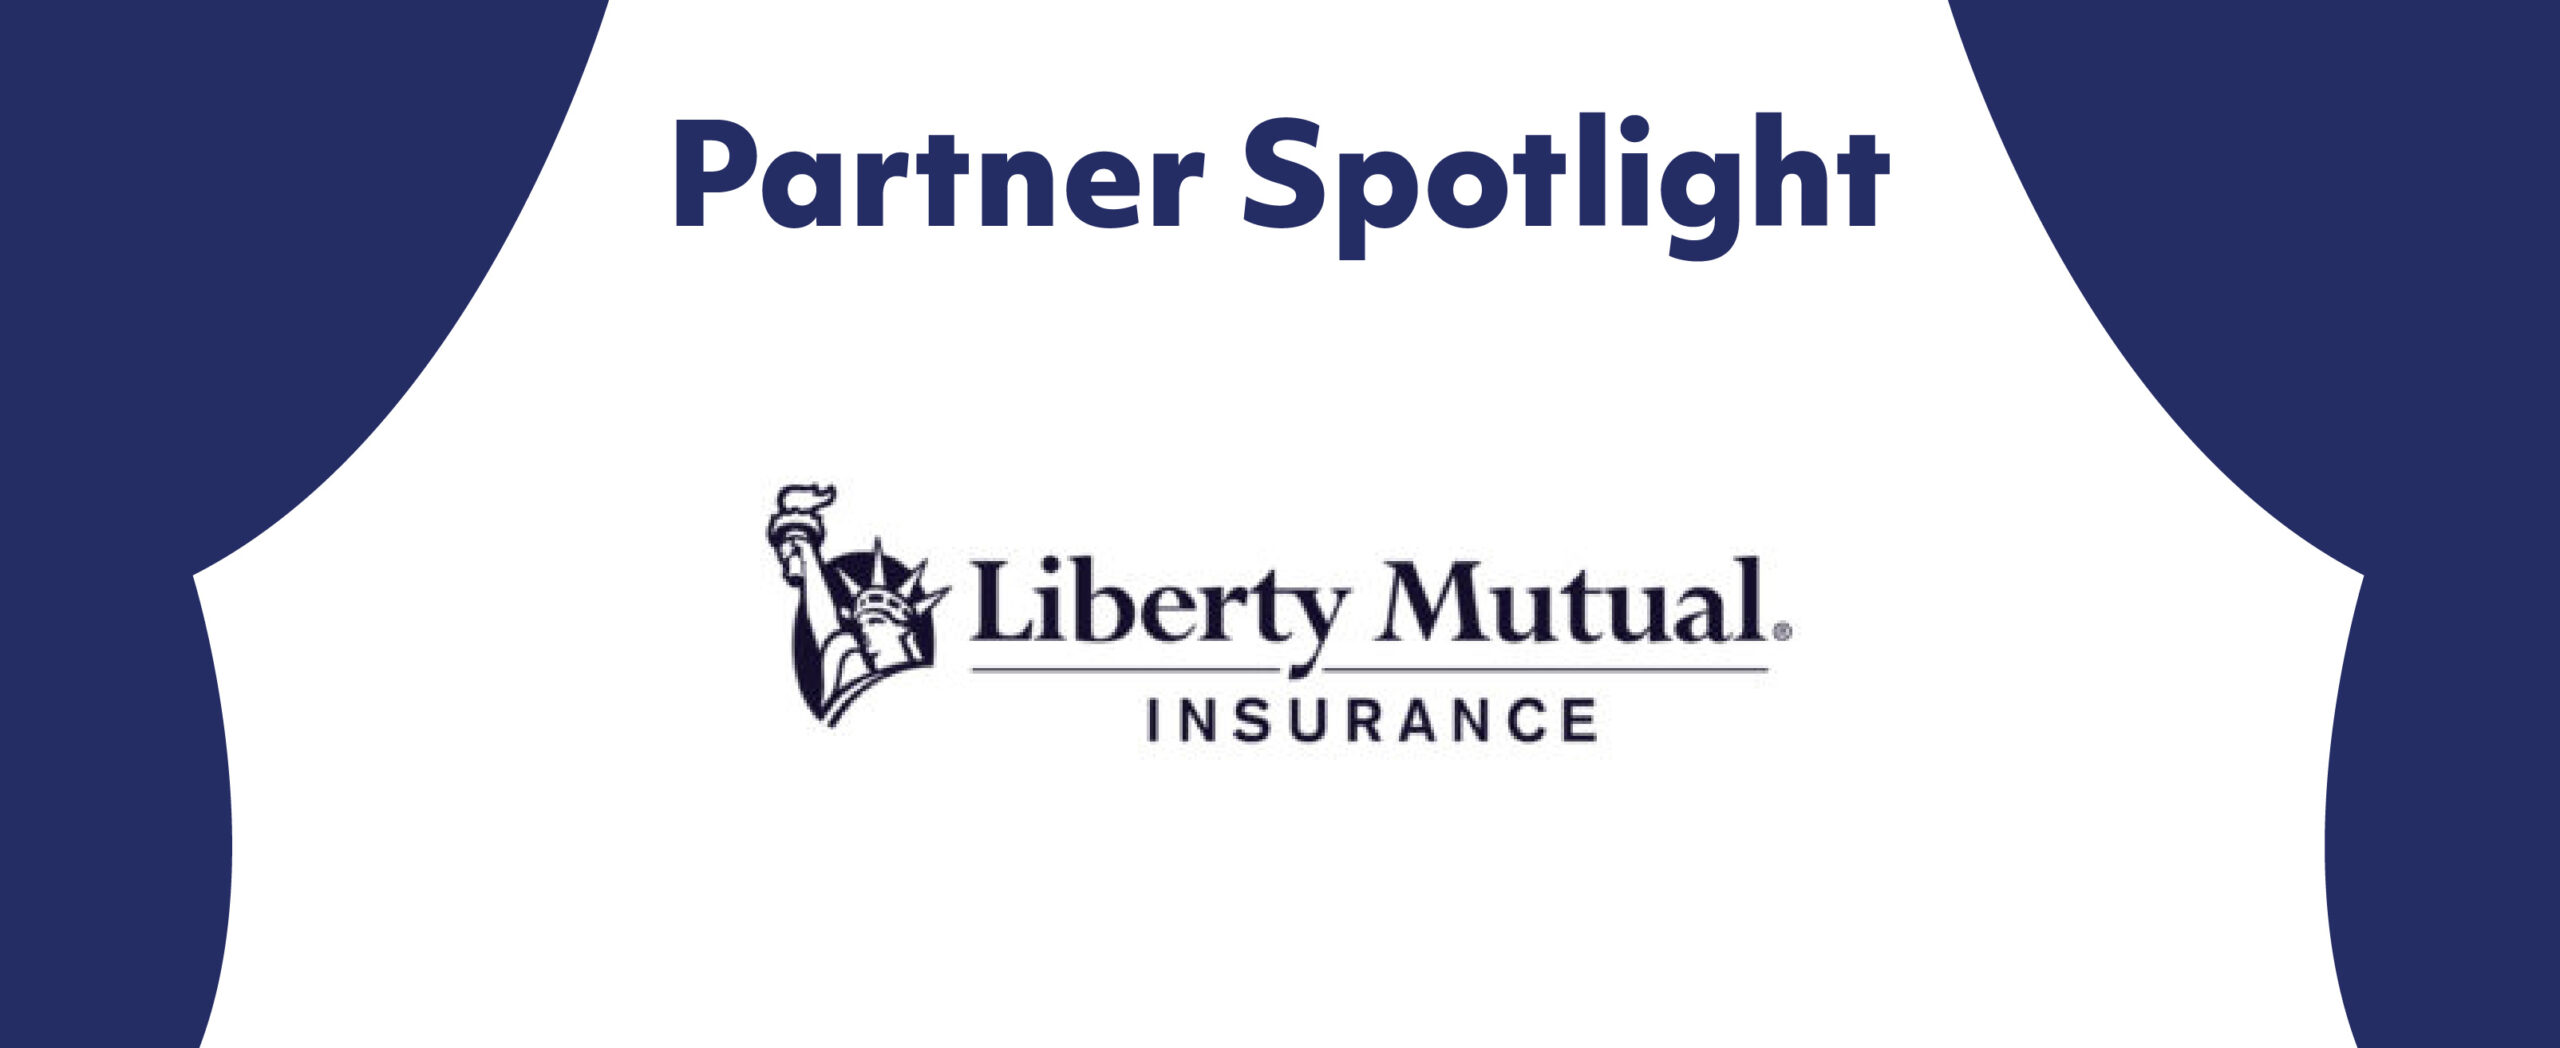 Blue theatrical curtains part around the text: Partner Spotlight Liberty Mutual Insurance